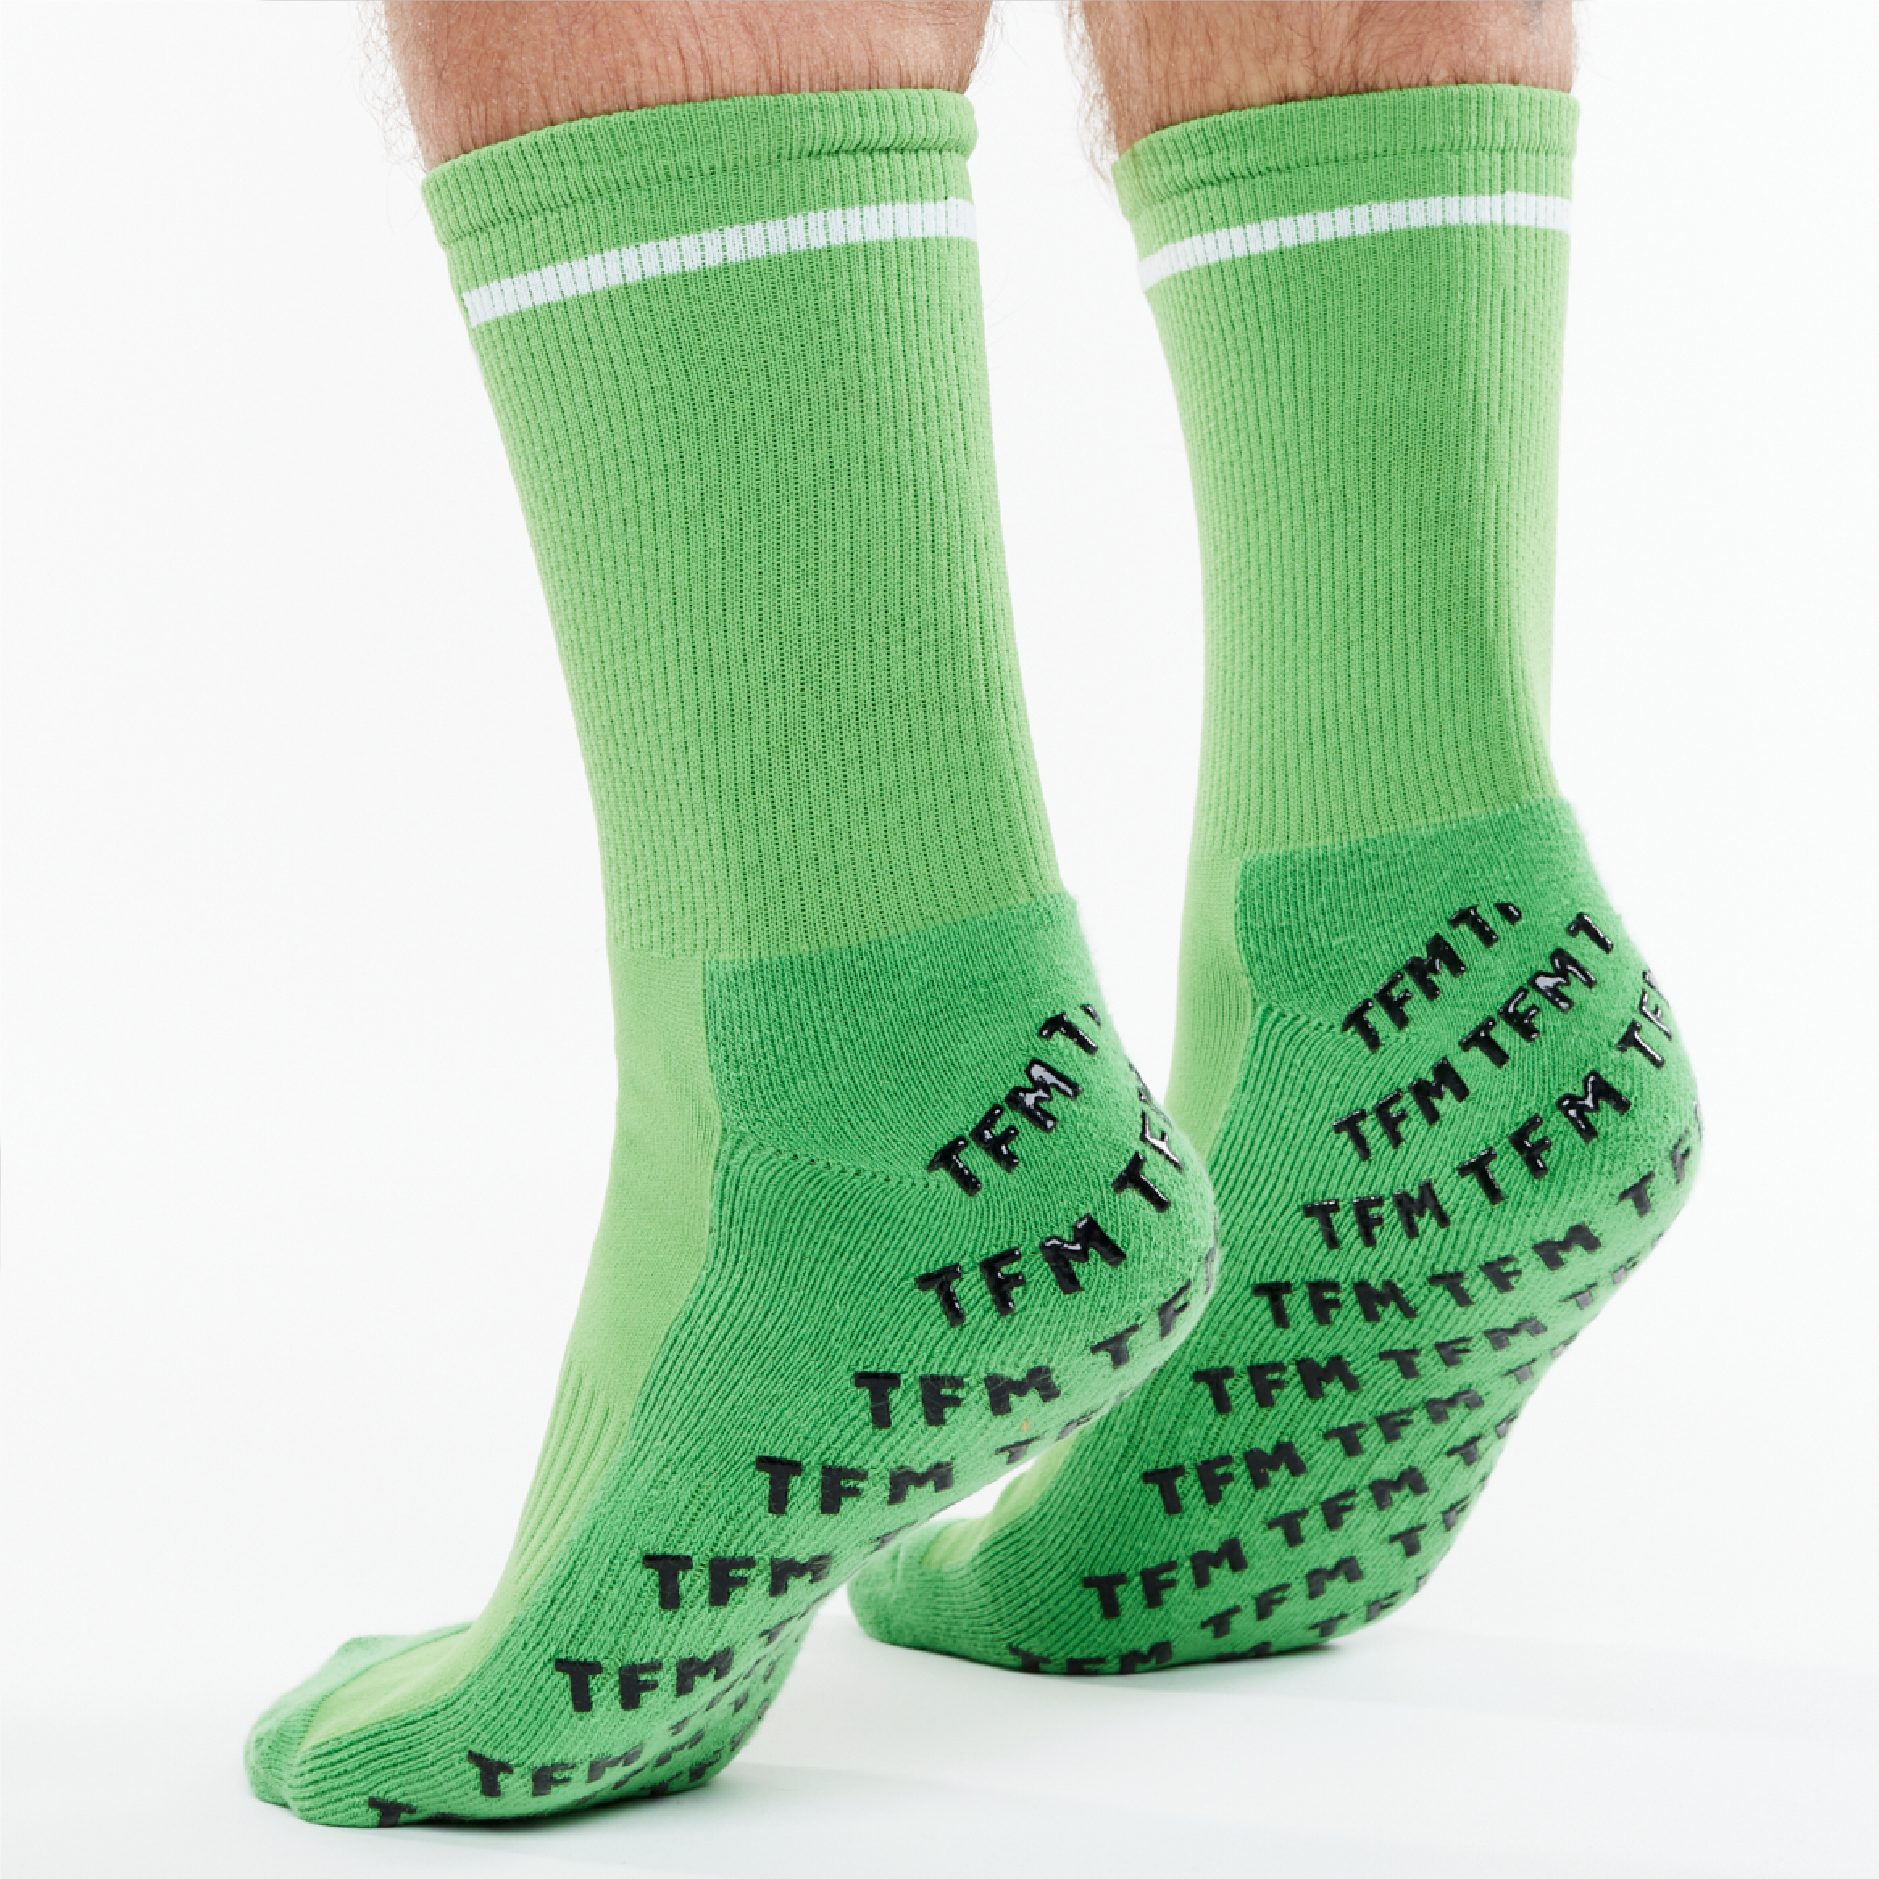 Buy the VENM Grip 2 sock from Soccer Village today! Designed with